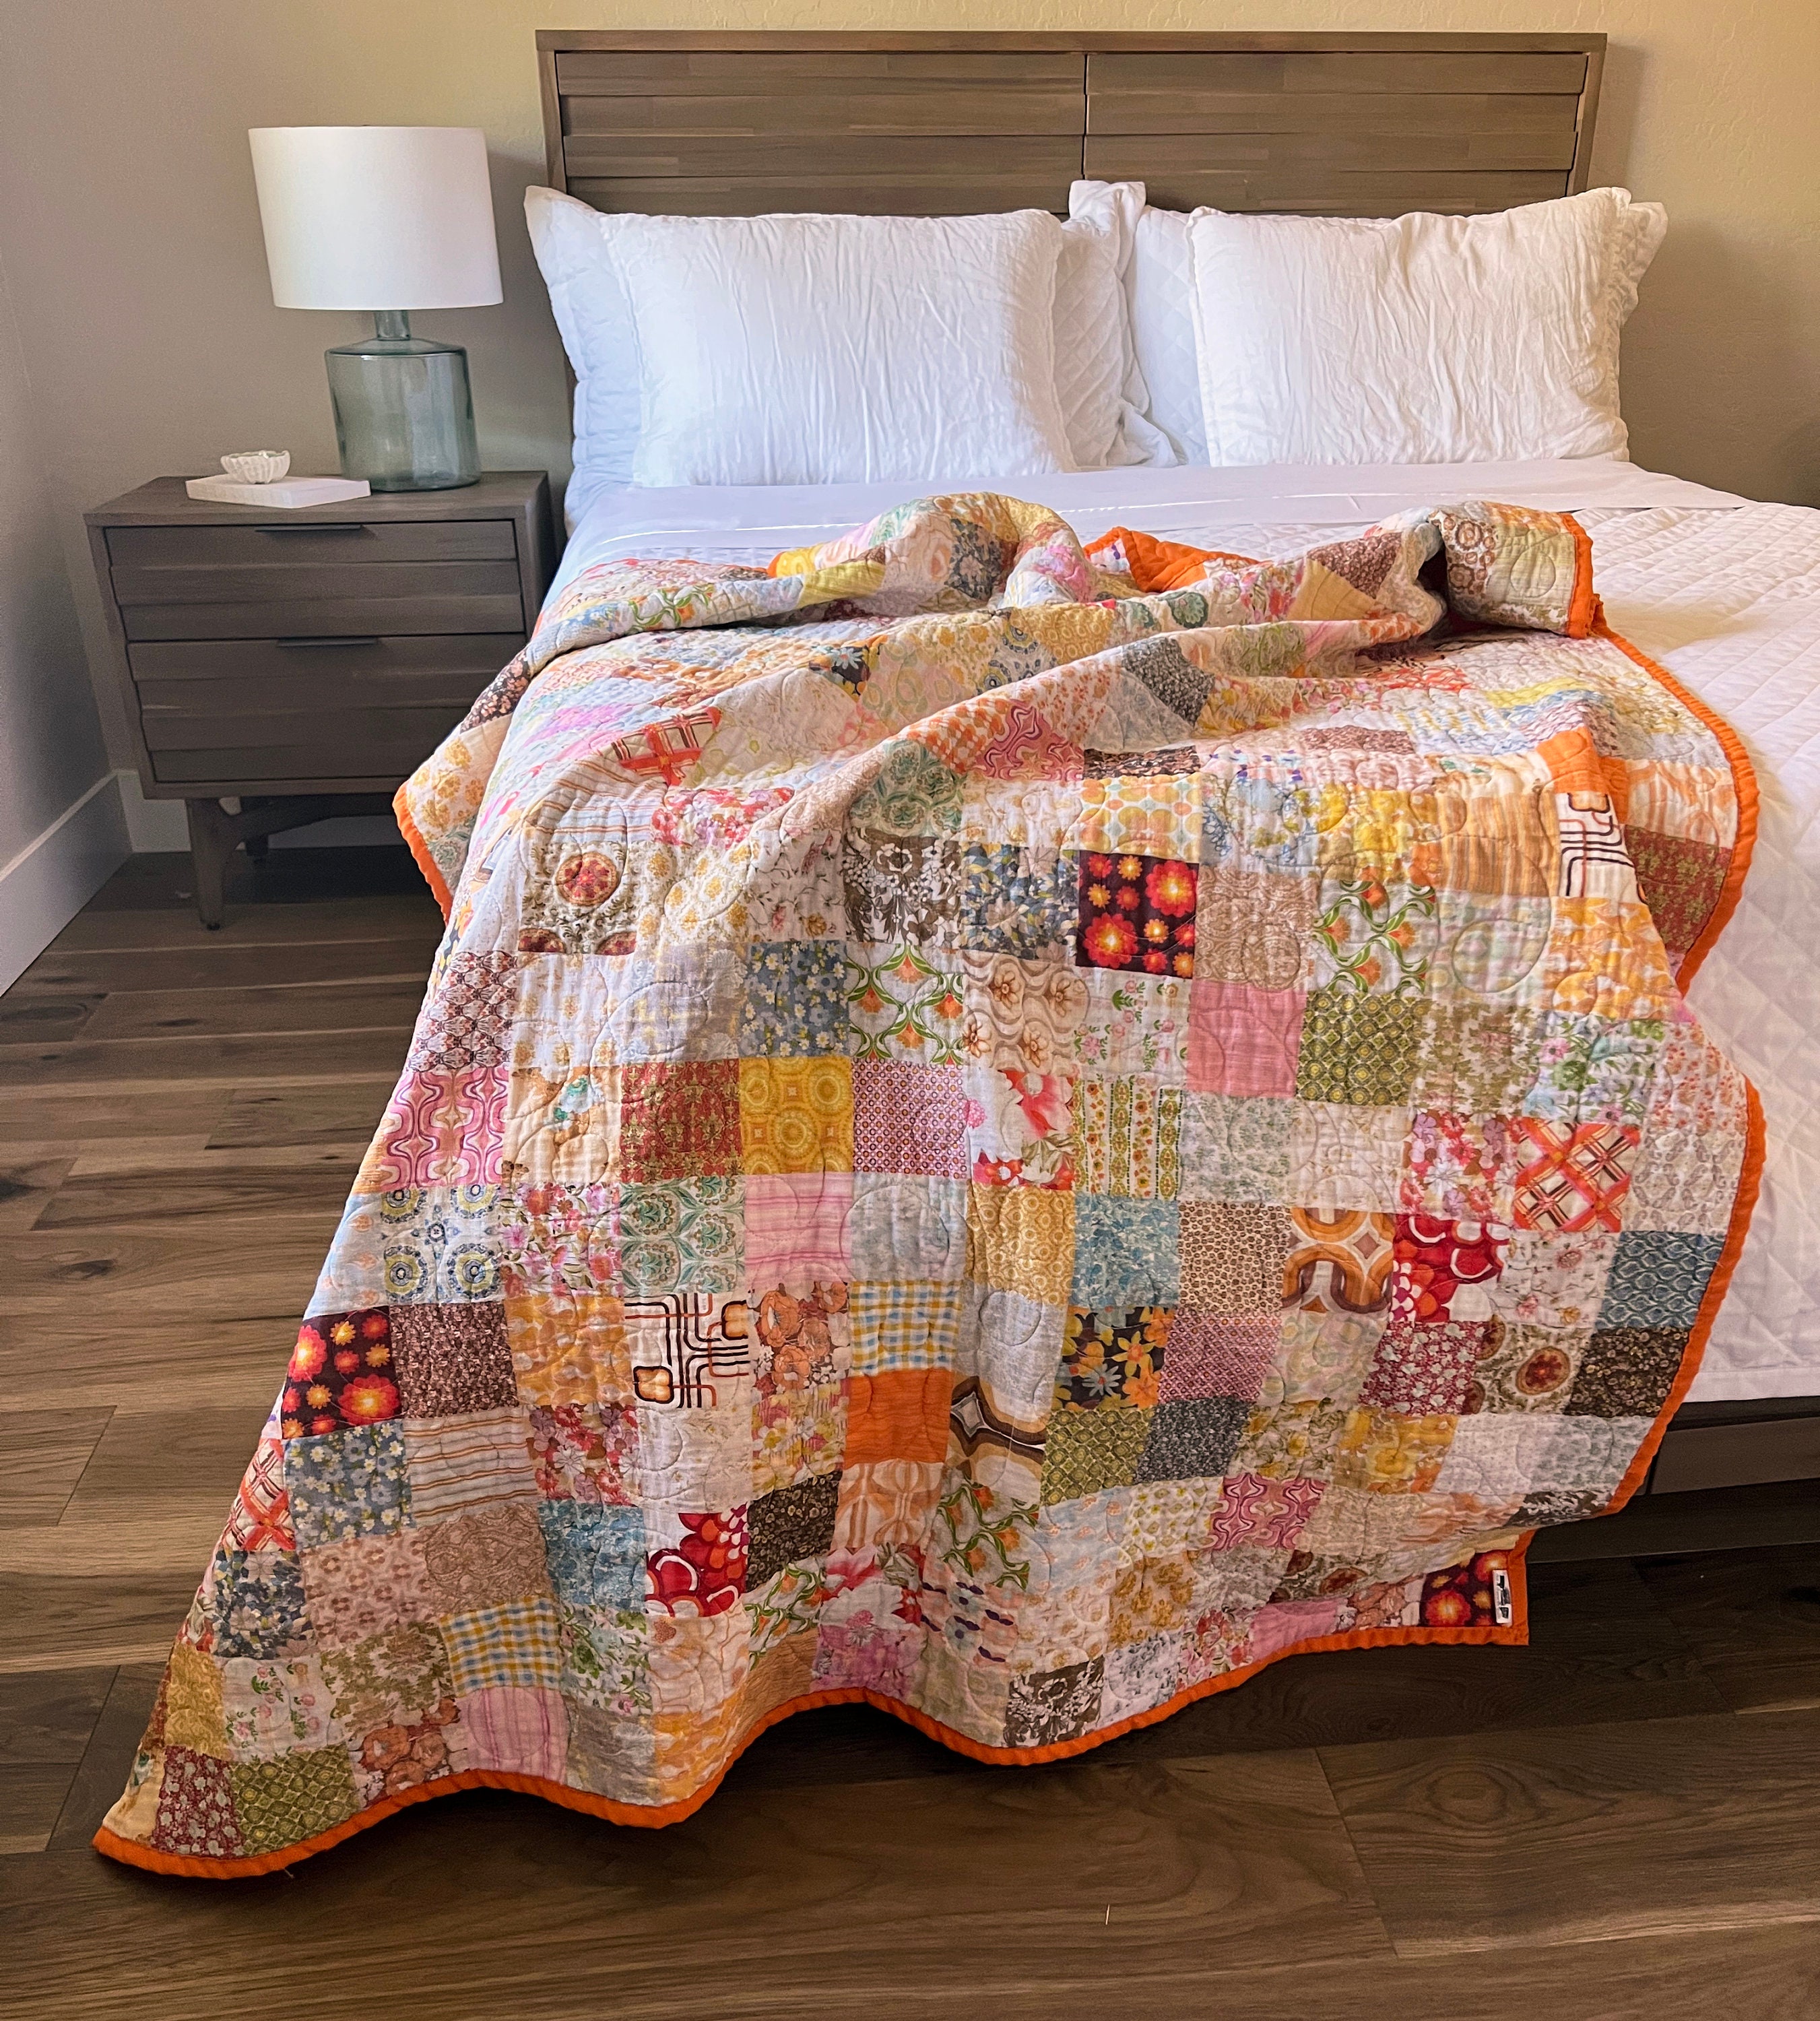 Decorating with Quilts - A Quilting Life